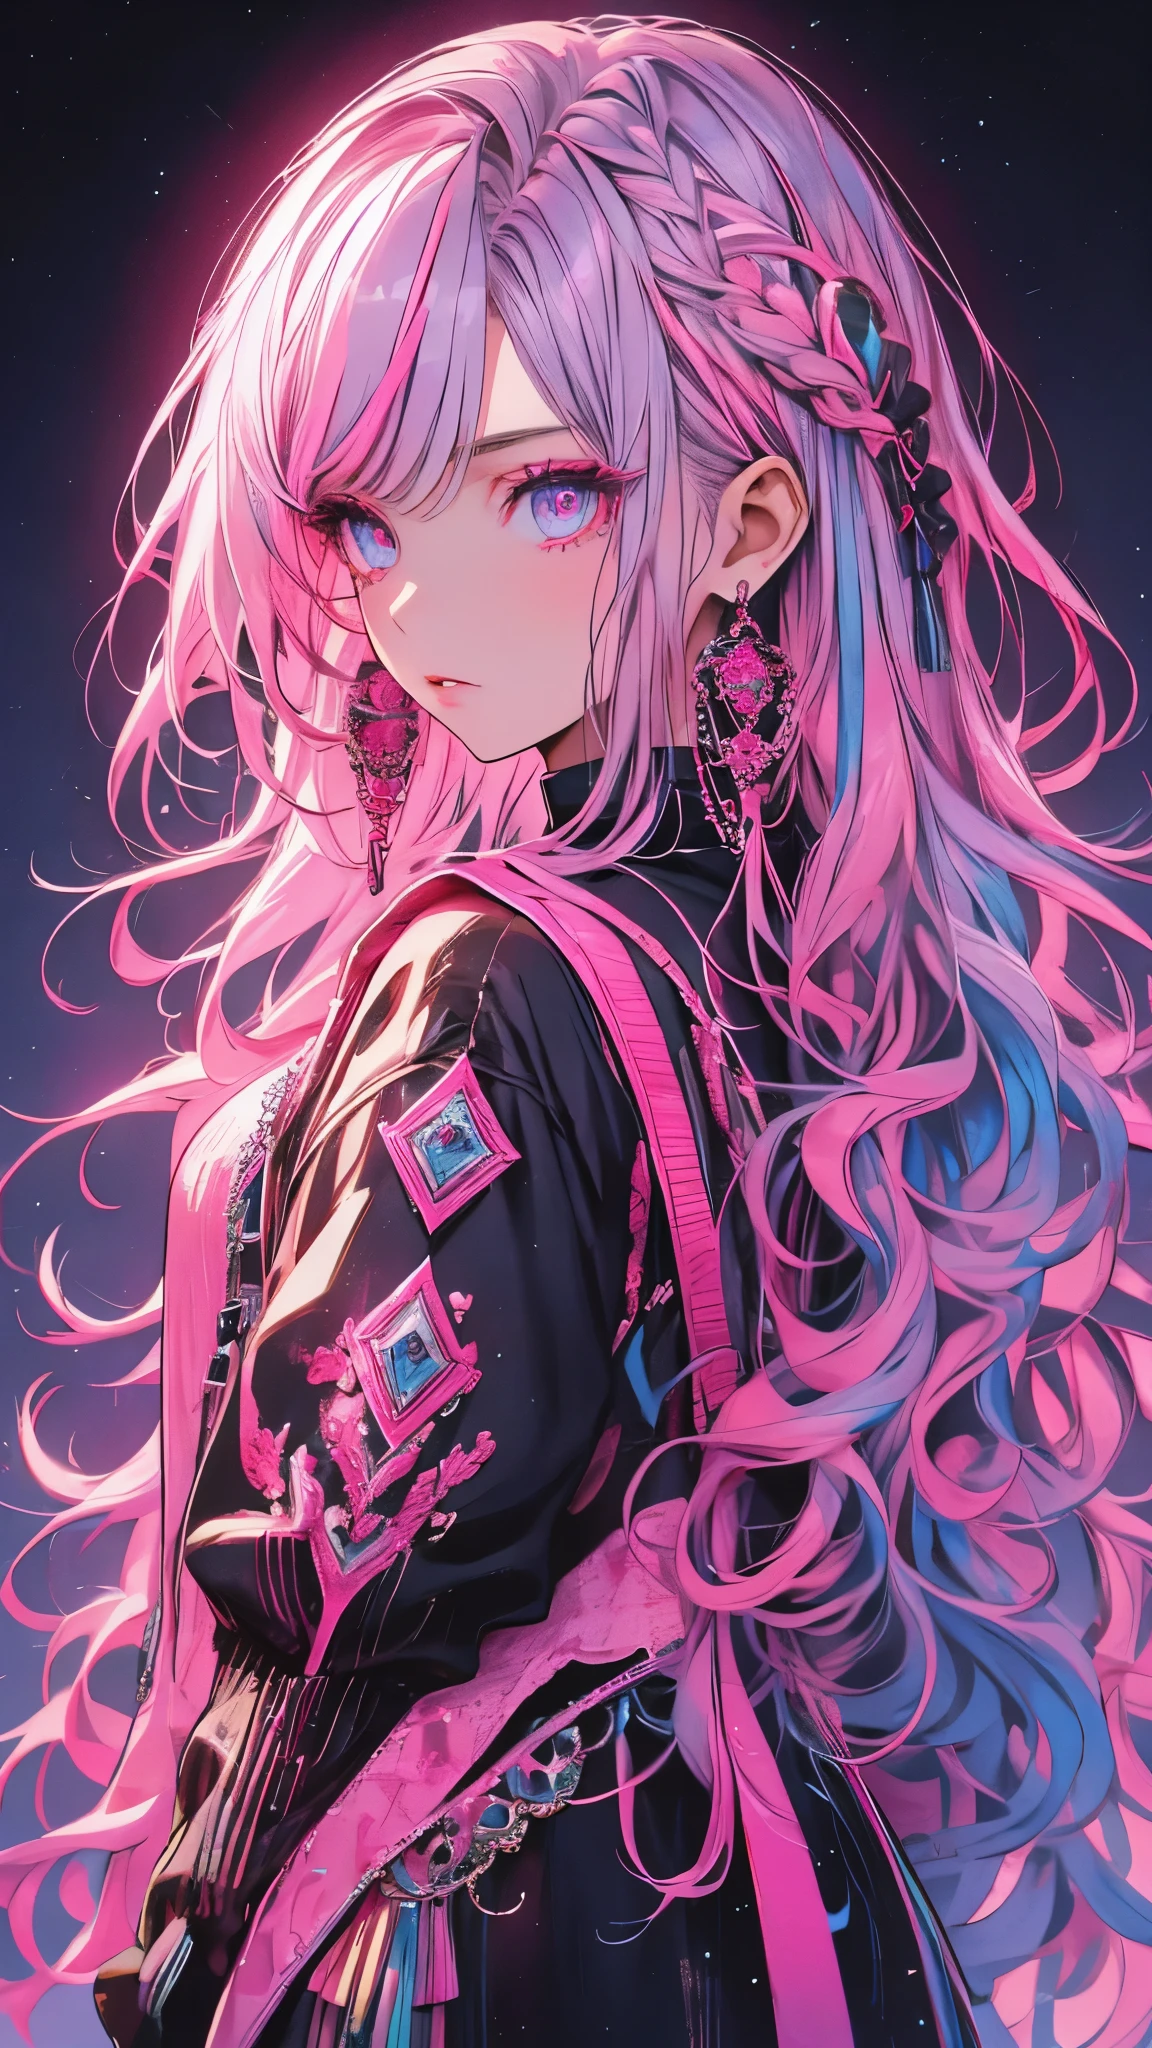 Hongliu, 1 girl, alone, long hair, looking at the viewer, blue eyes background, white background, jewelry, closed mouth, Jacket, Upper body, pink hair, earrings, pink eyes, necklace, From the side, sweater, lips, eyelash, compensate, wavy hair, earrings, cross, lipstick, ear earrings, eye shadow, hoop earrings, pink lips, multicolored eyes, pink theme, , pink eye shadow,